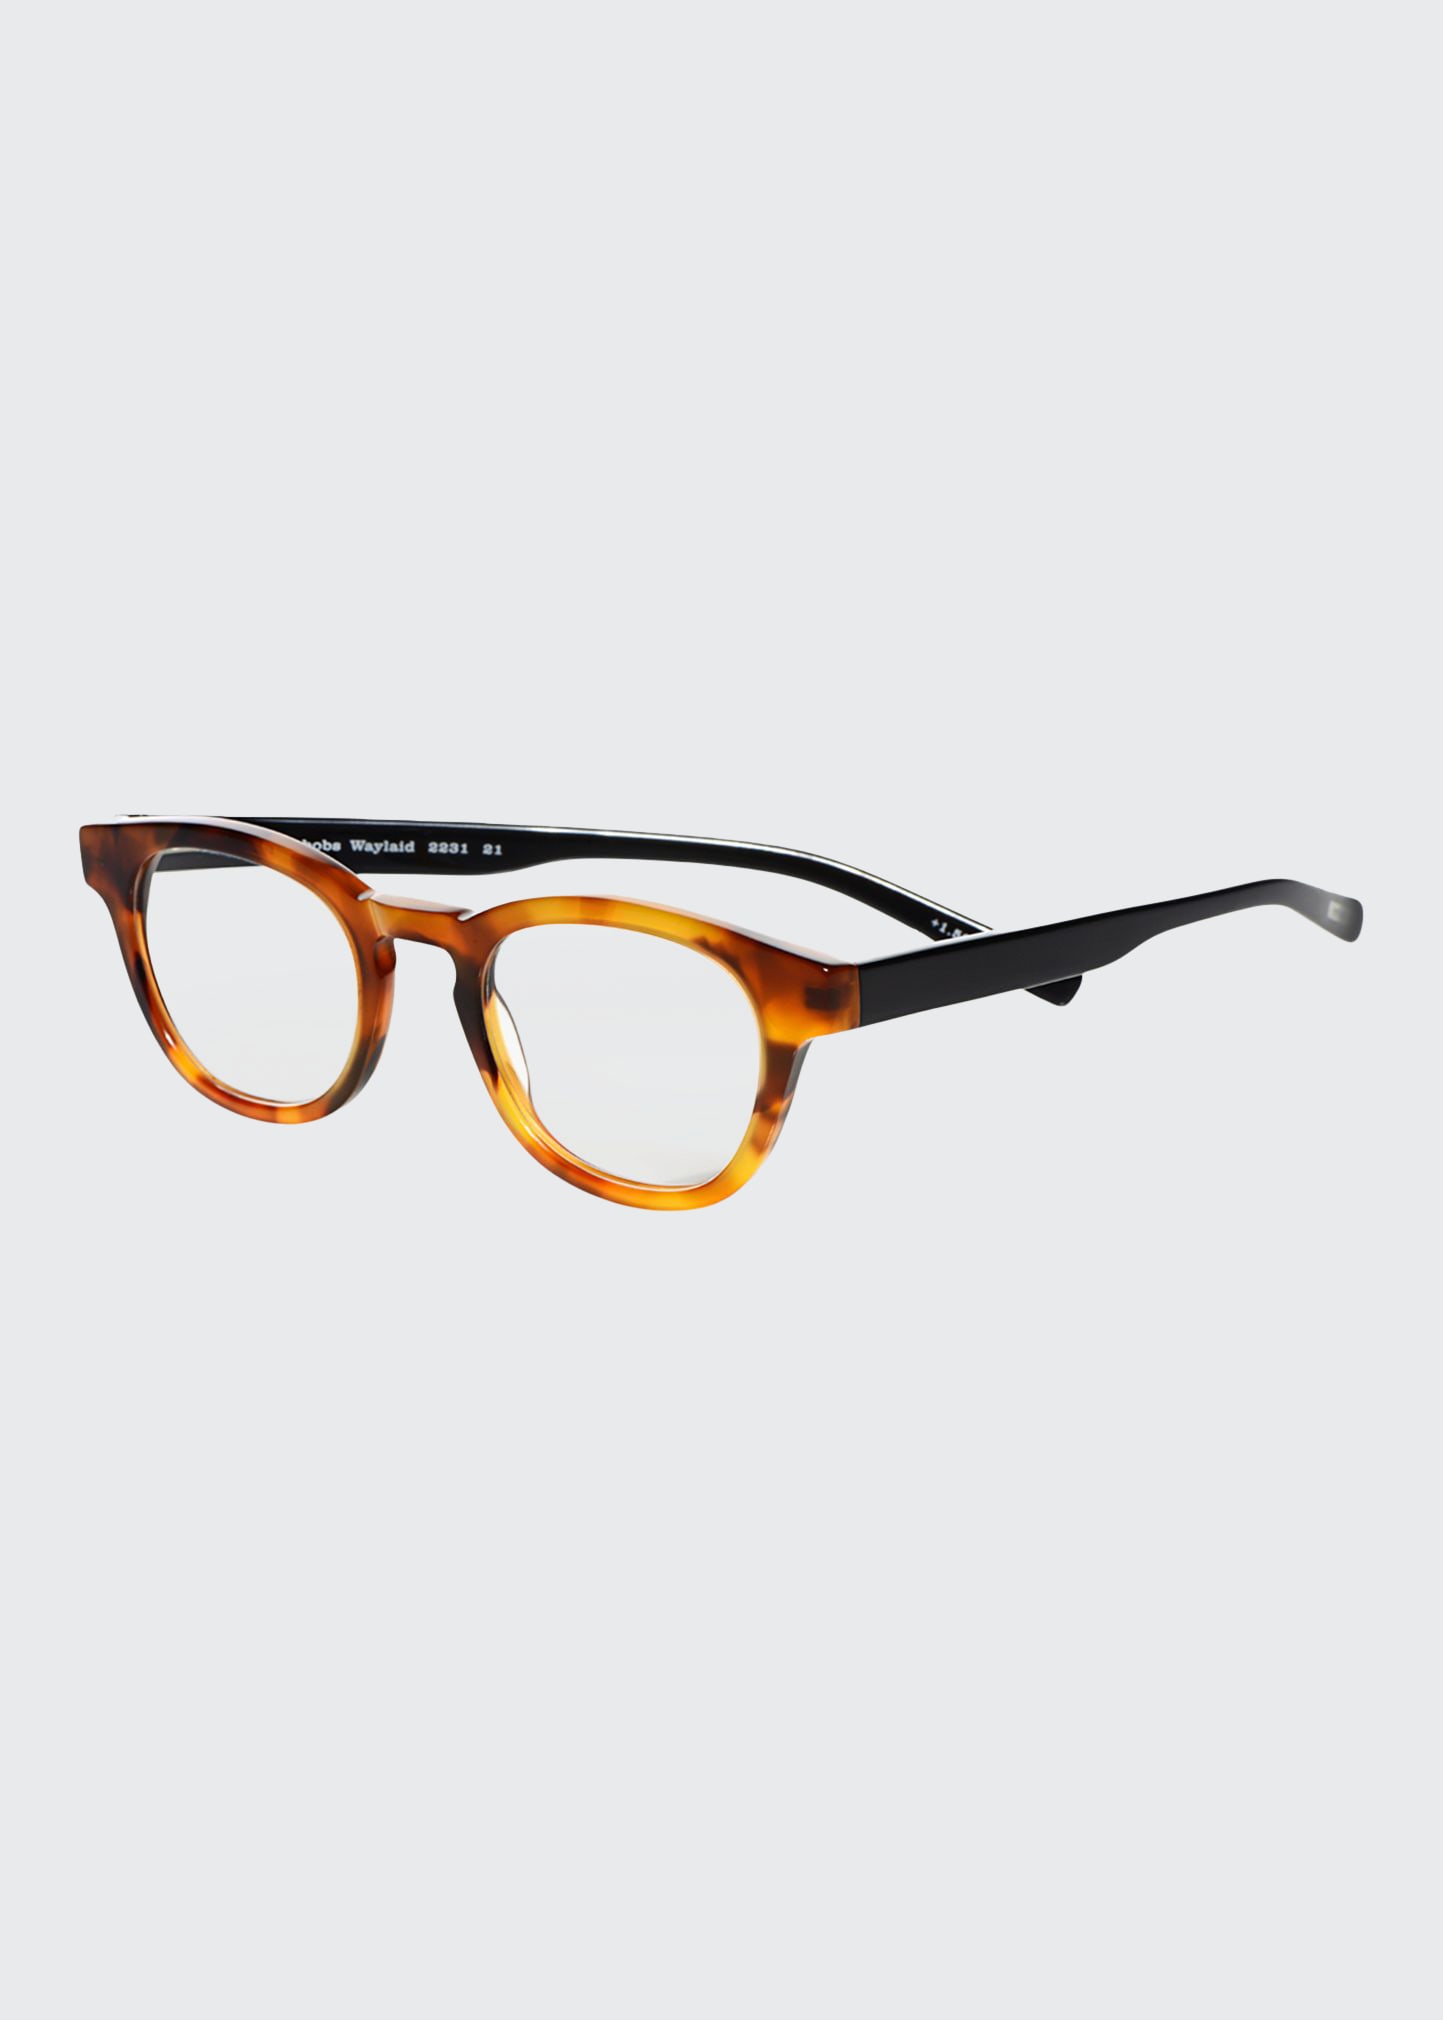 Eyebobs Waylaid Square Acetate Readers